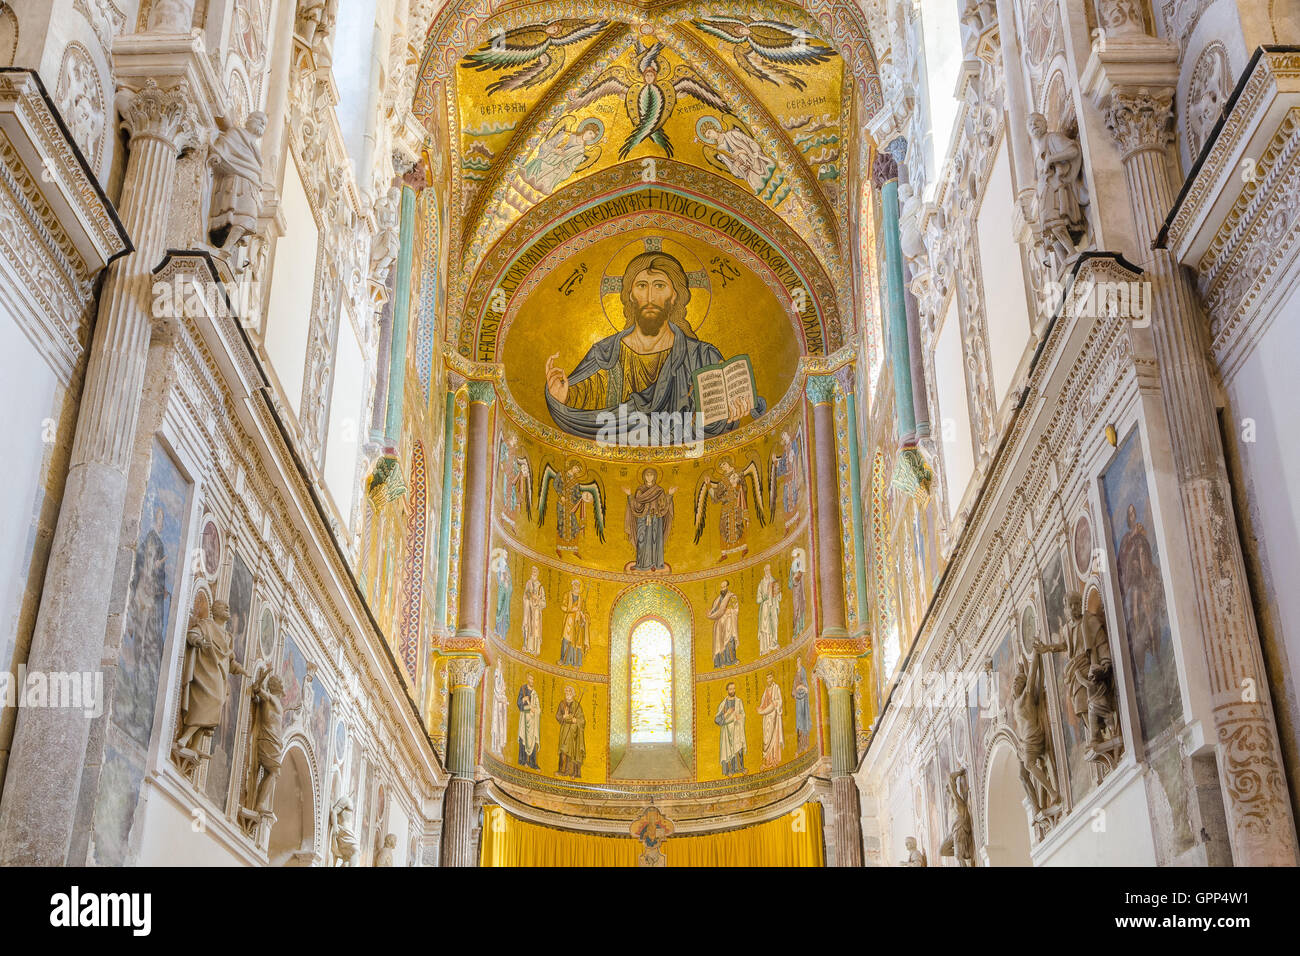 Interior of the Cathedral-Basilica of Cefalu. Mosaic of Christ. Stock Photo